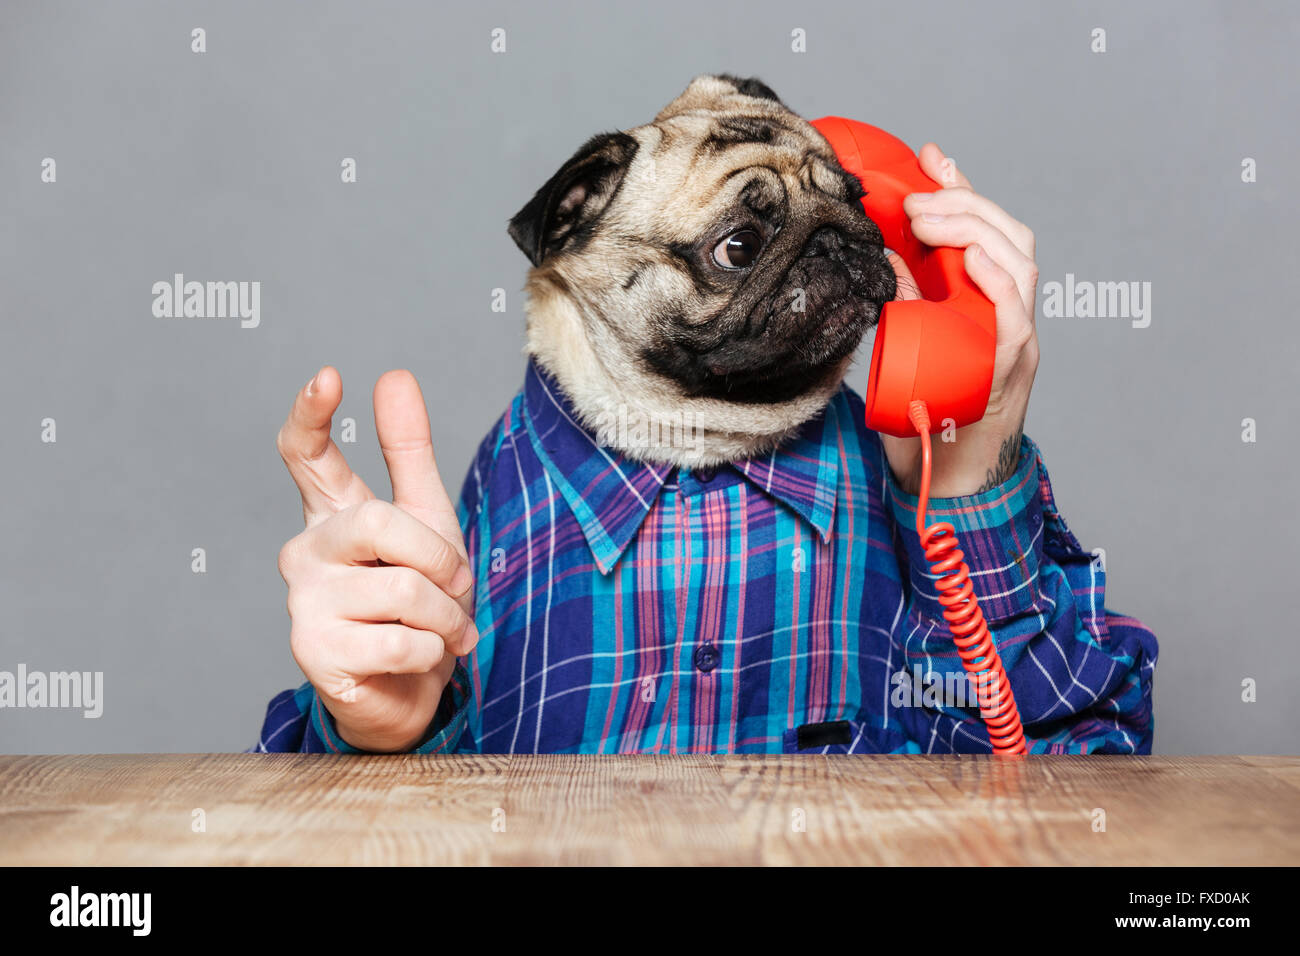 Amazed man with pug dog head in checkered shirt talking on telephone over grey background Stock Photo